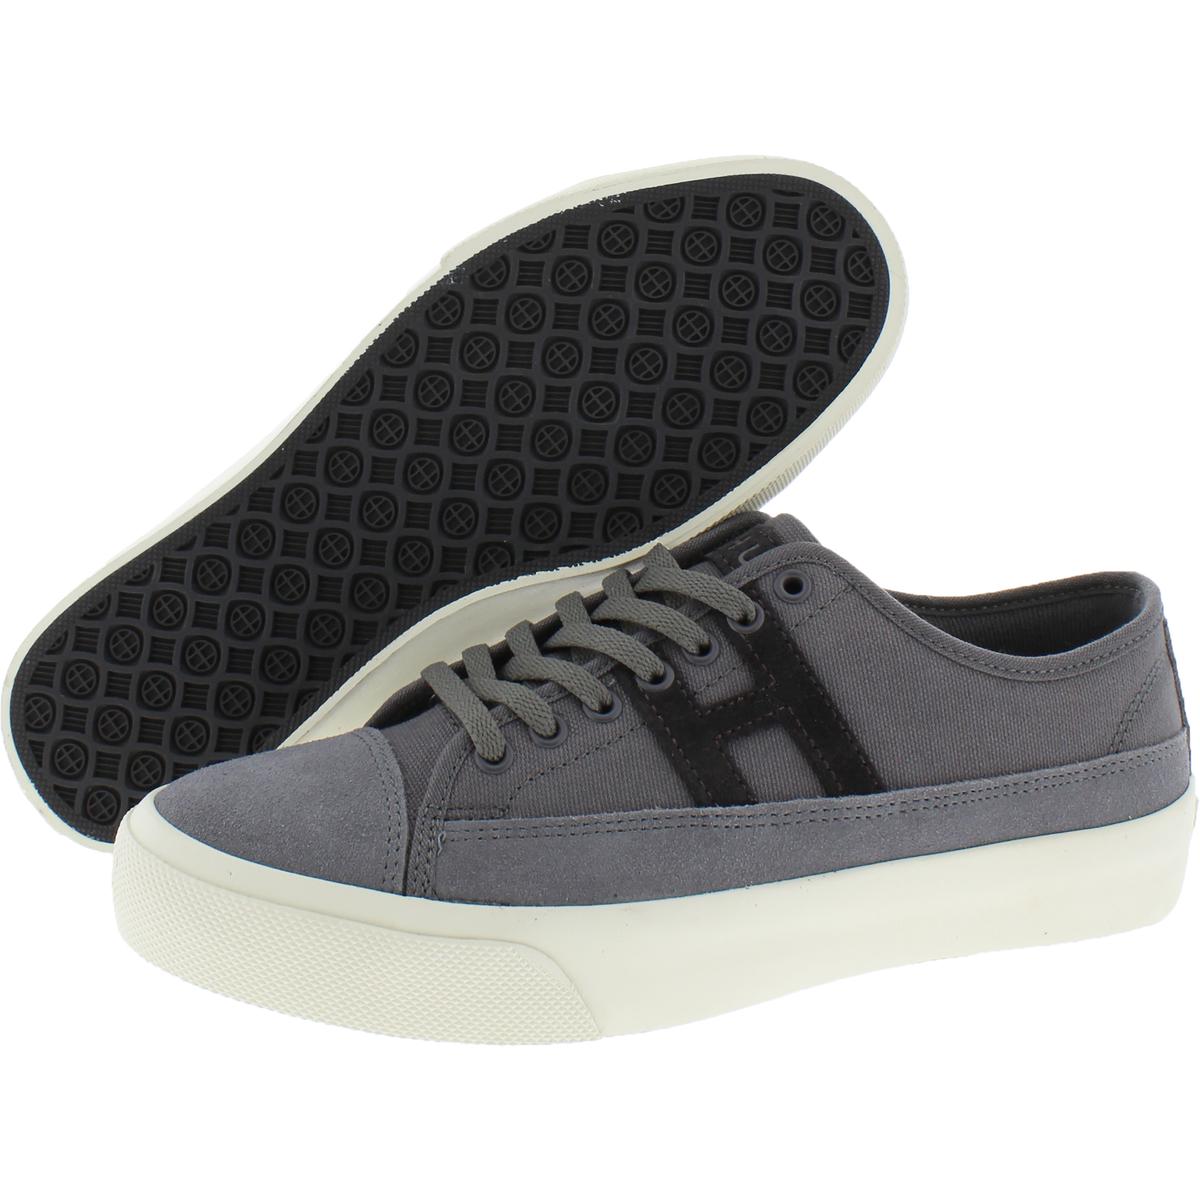 HUF Mens Hupper 2 Lo Canvas Low Top Skateboarding Shoes Athletic BHFO ...